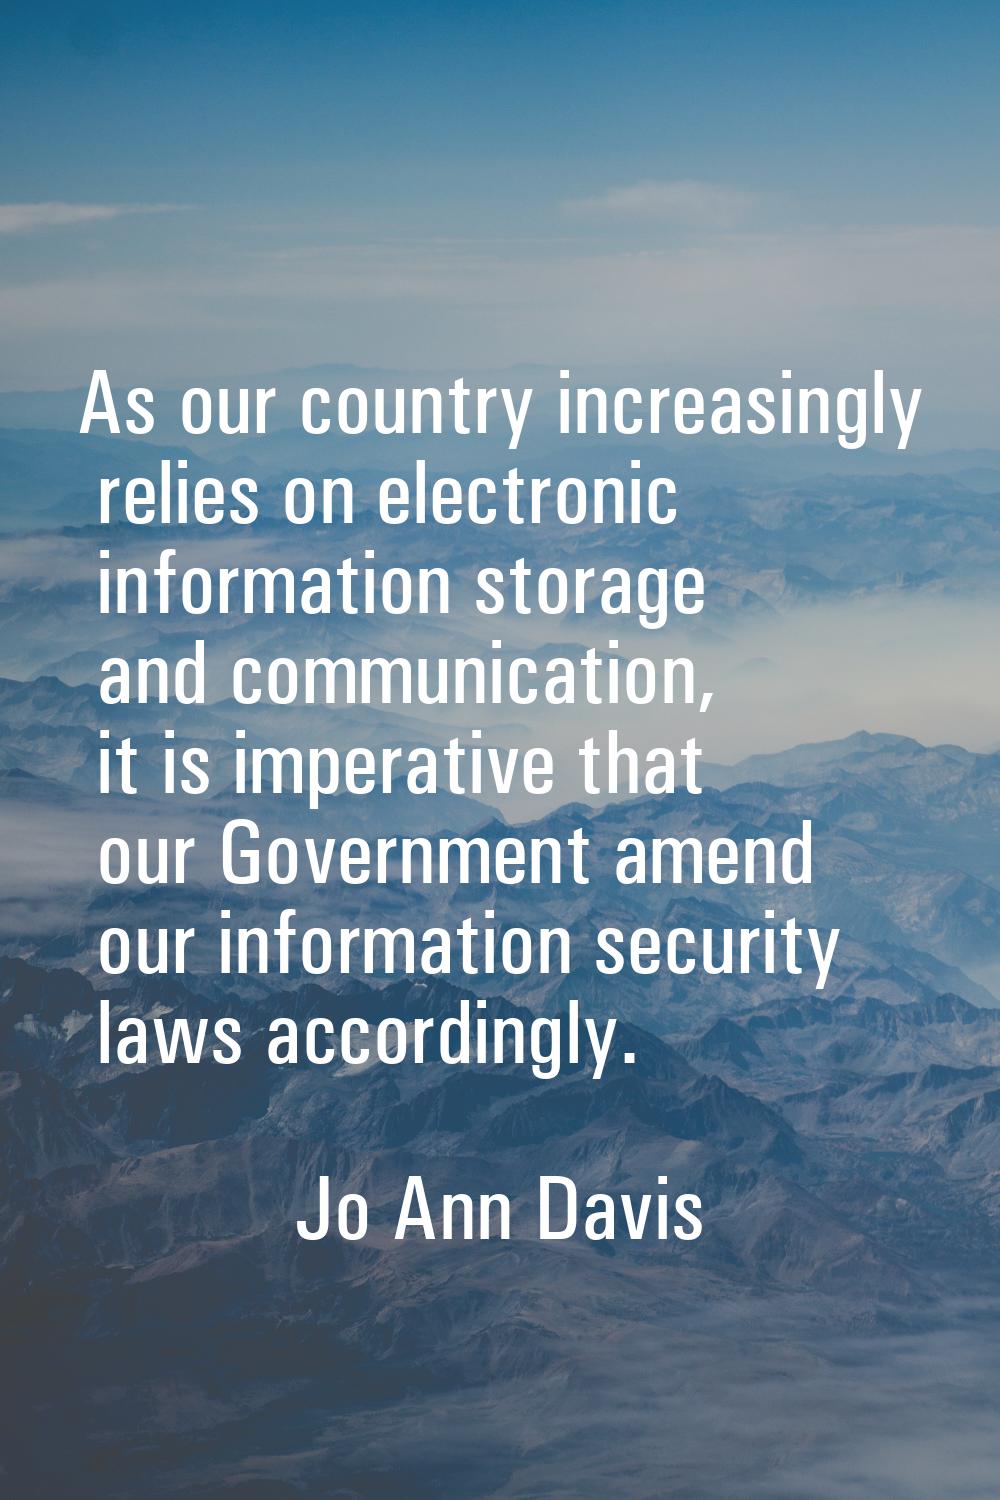 As our country increasingly relies on electronic information storage and communication, it is imper